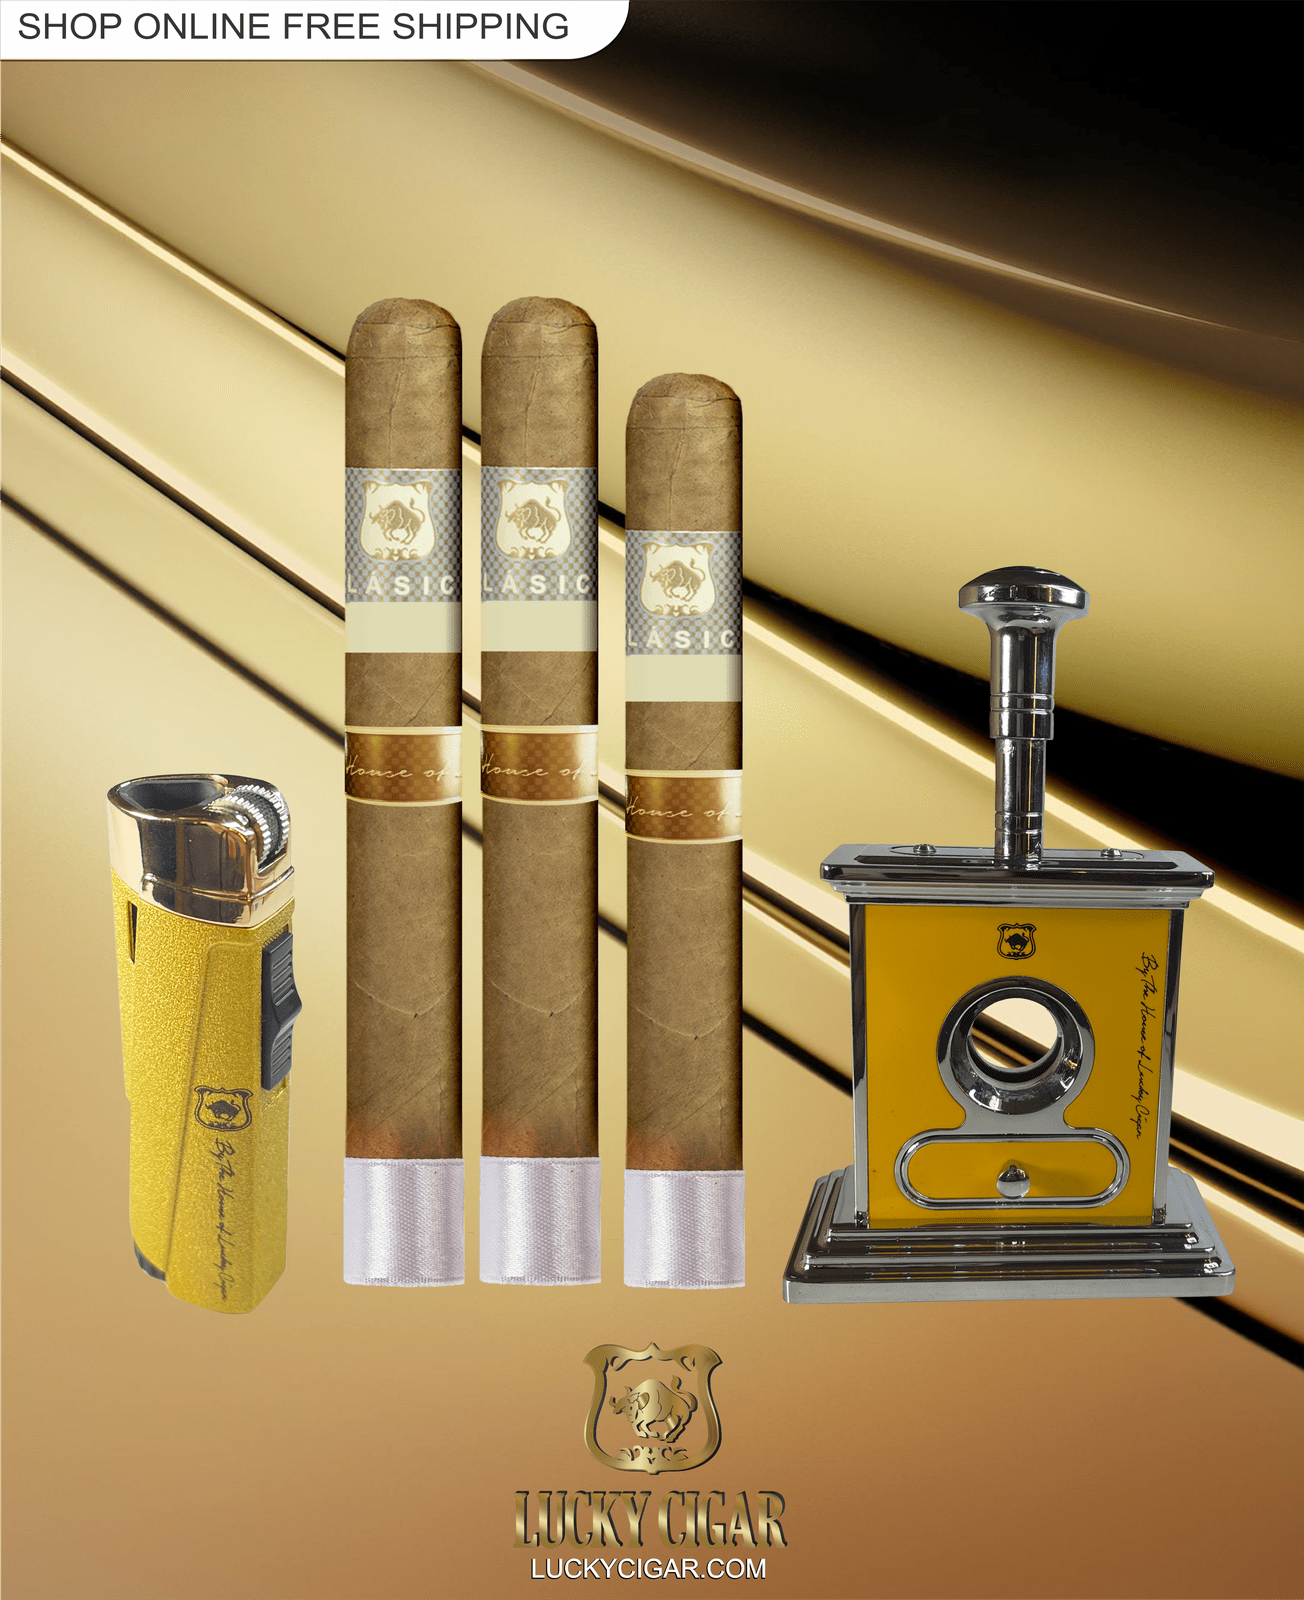 Lucky Cigar Sampler Sets: Set of 3 Classico Toro, Robusto Cigars with Torch, Table Cutter